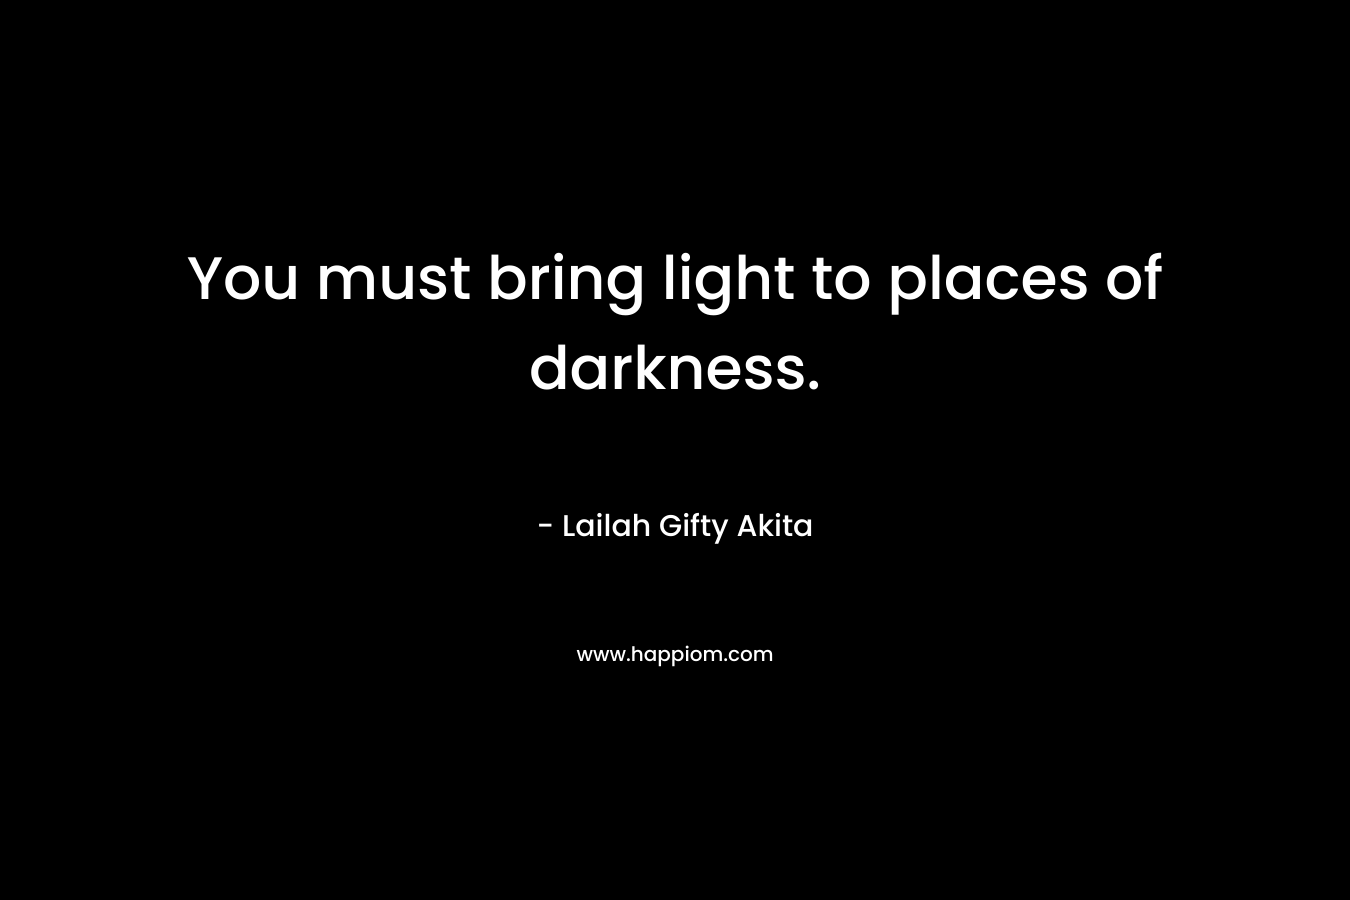 You must bring light to places of darkness.